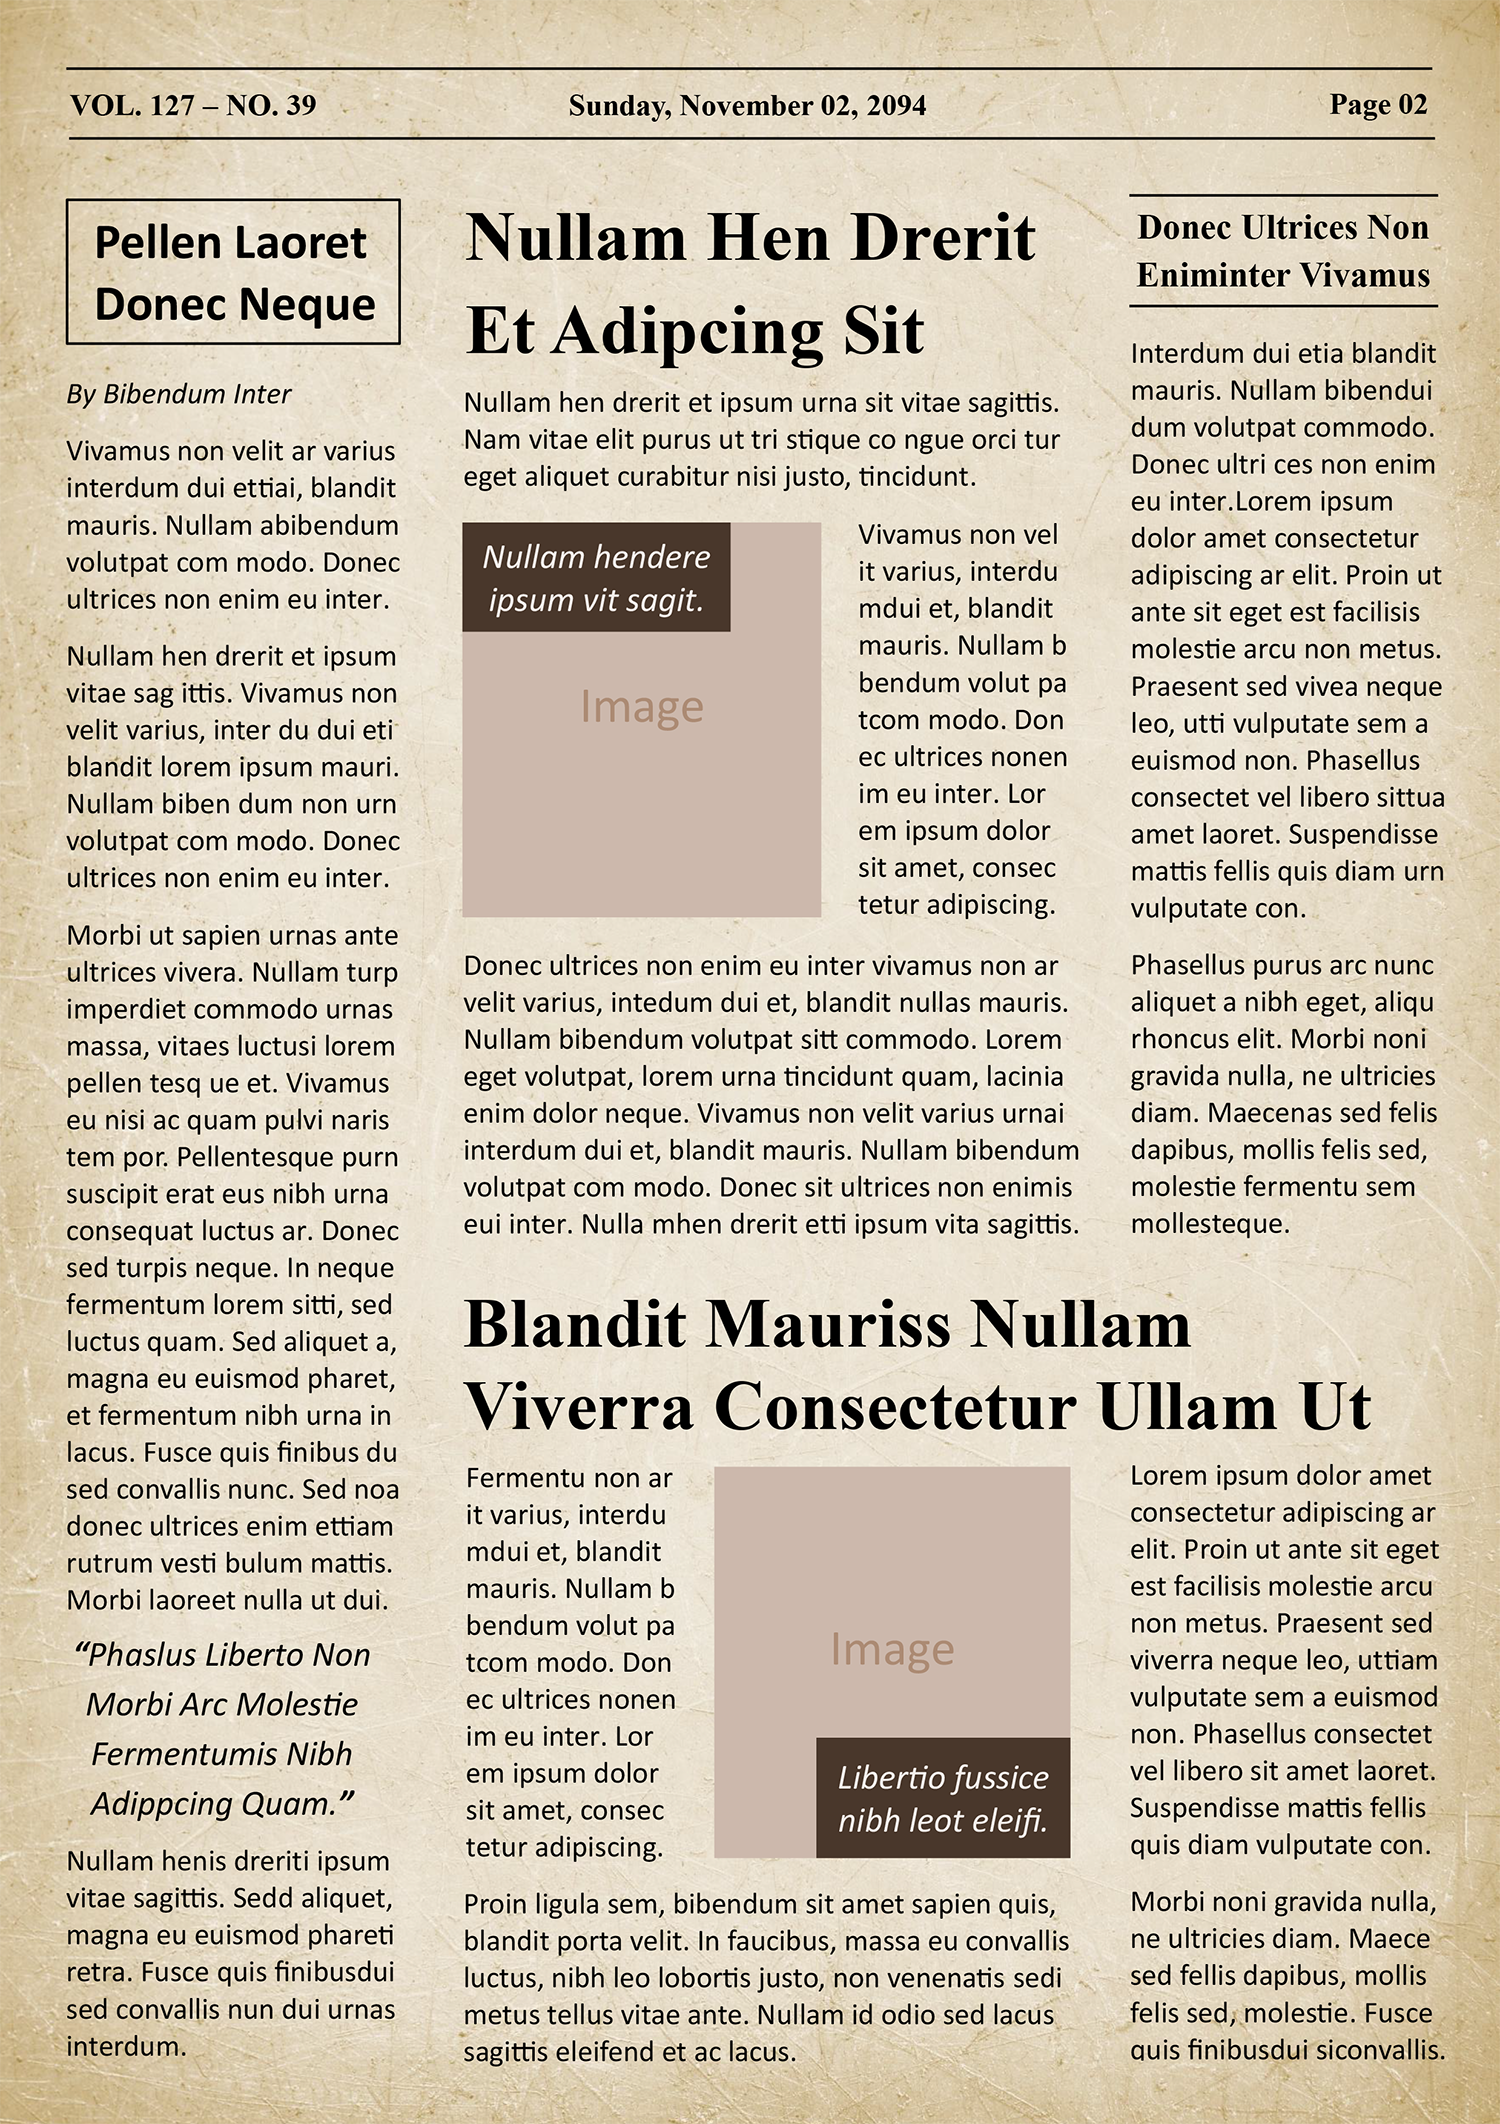 Vintage Newspaper Front Page Template - Page 02